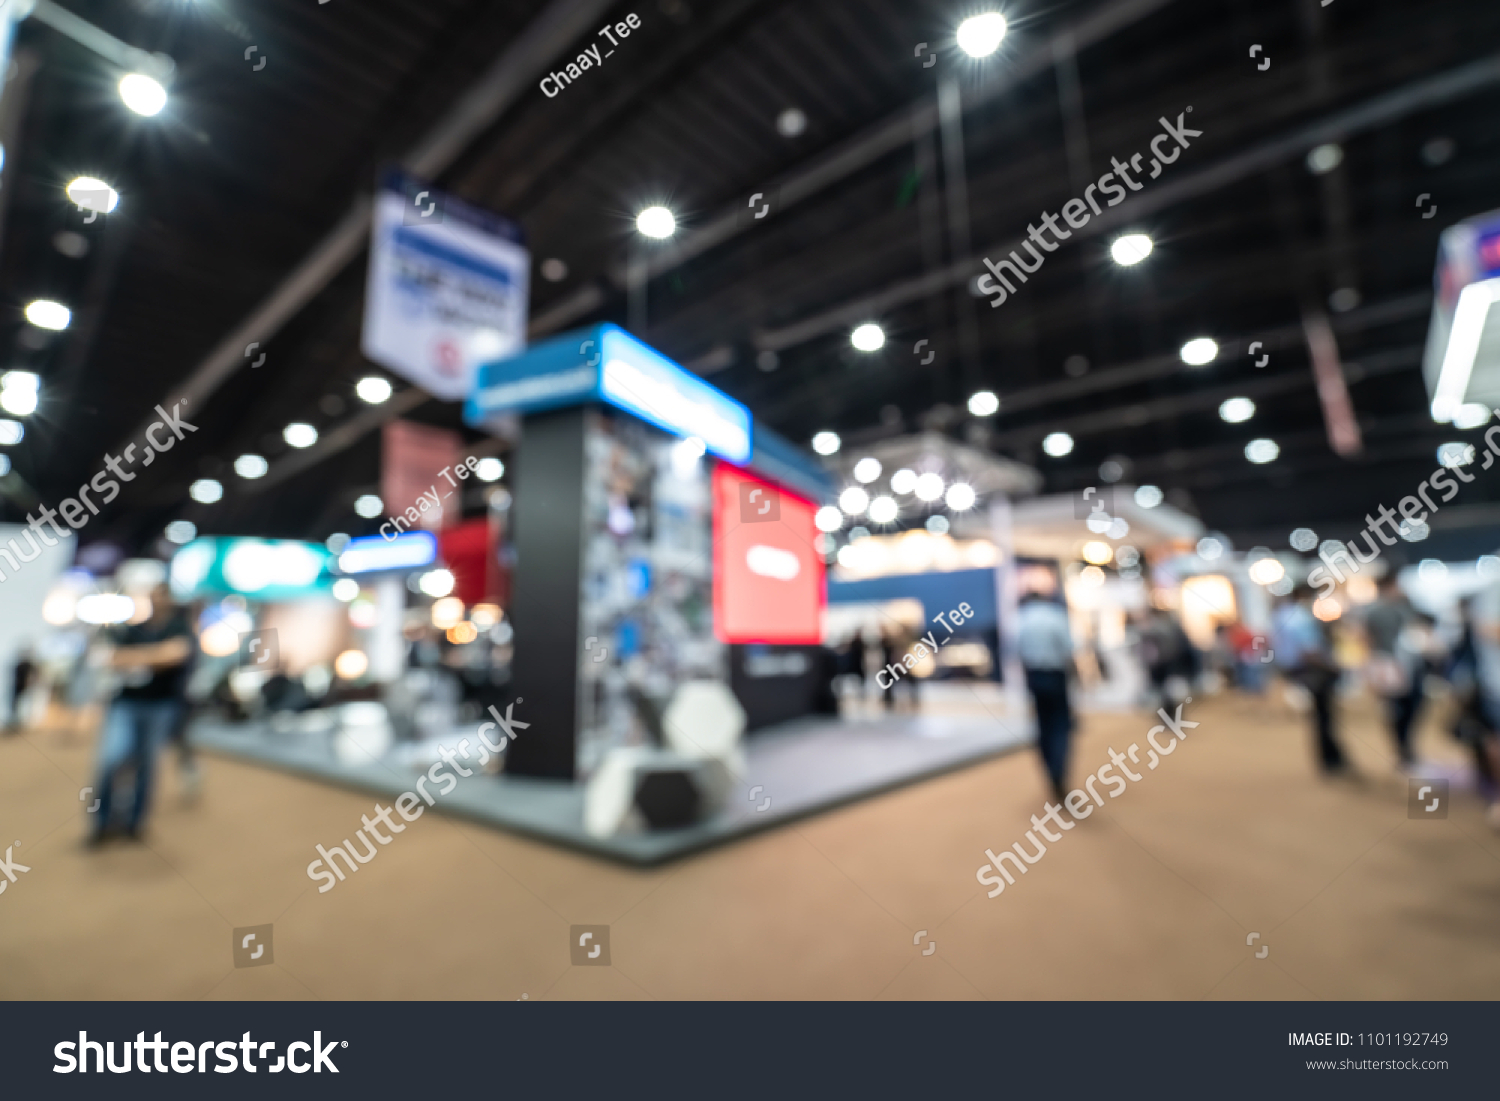 Abstract blurred defocused trade event exhibition background, business convention show concept. #1101192749